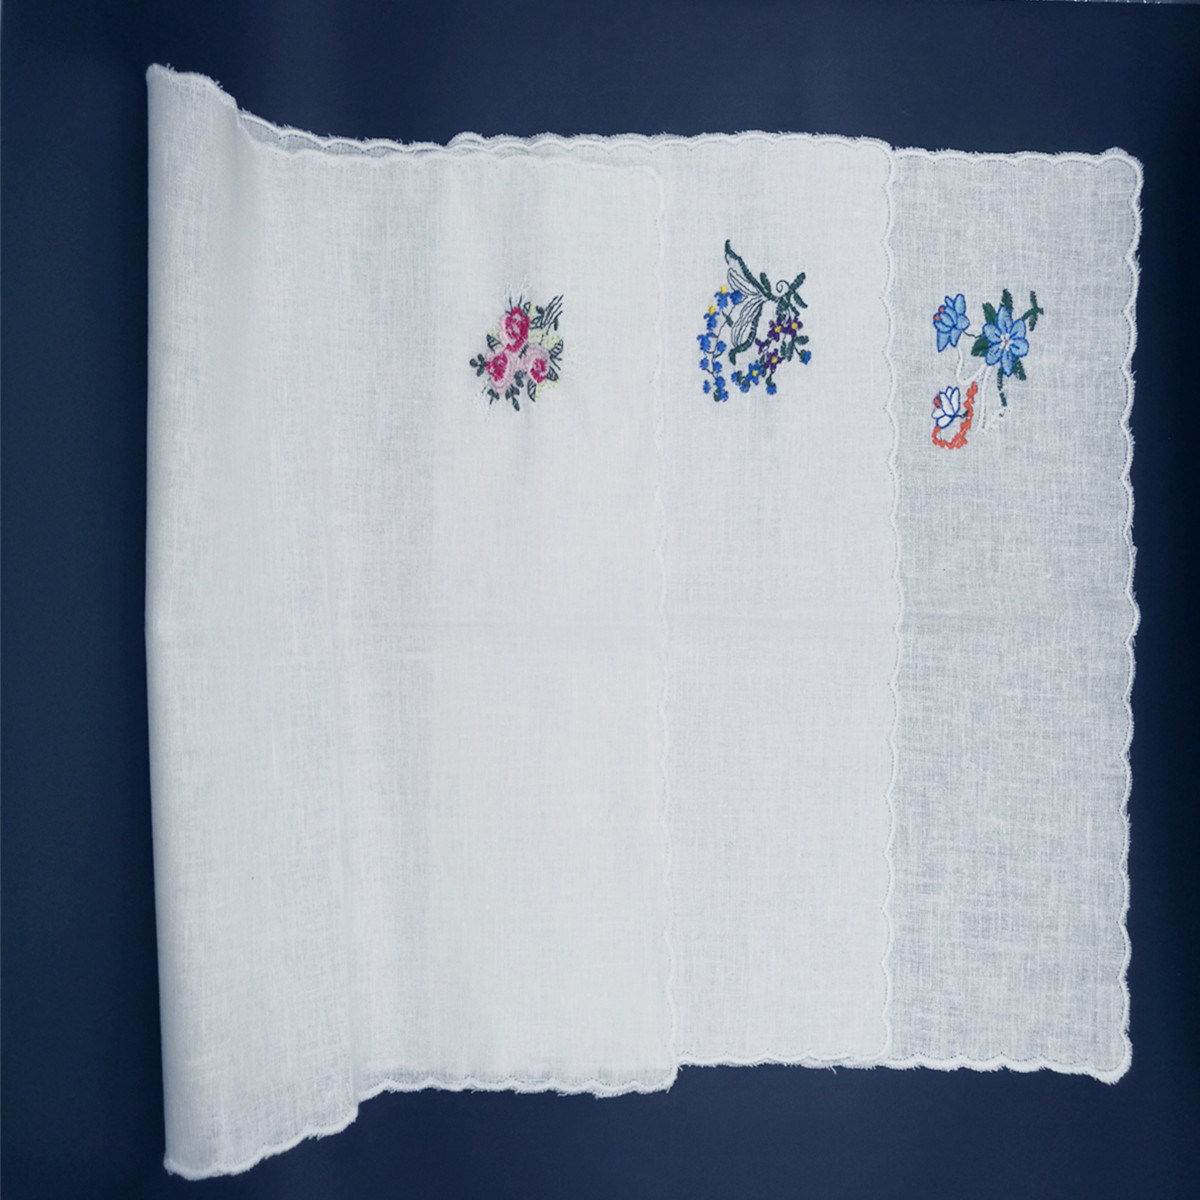 Handkerchief Embroidery Patterns Hot Item Cheap White Cotton Embroidery Pocket Square